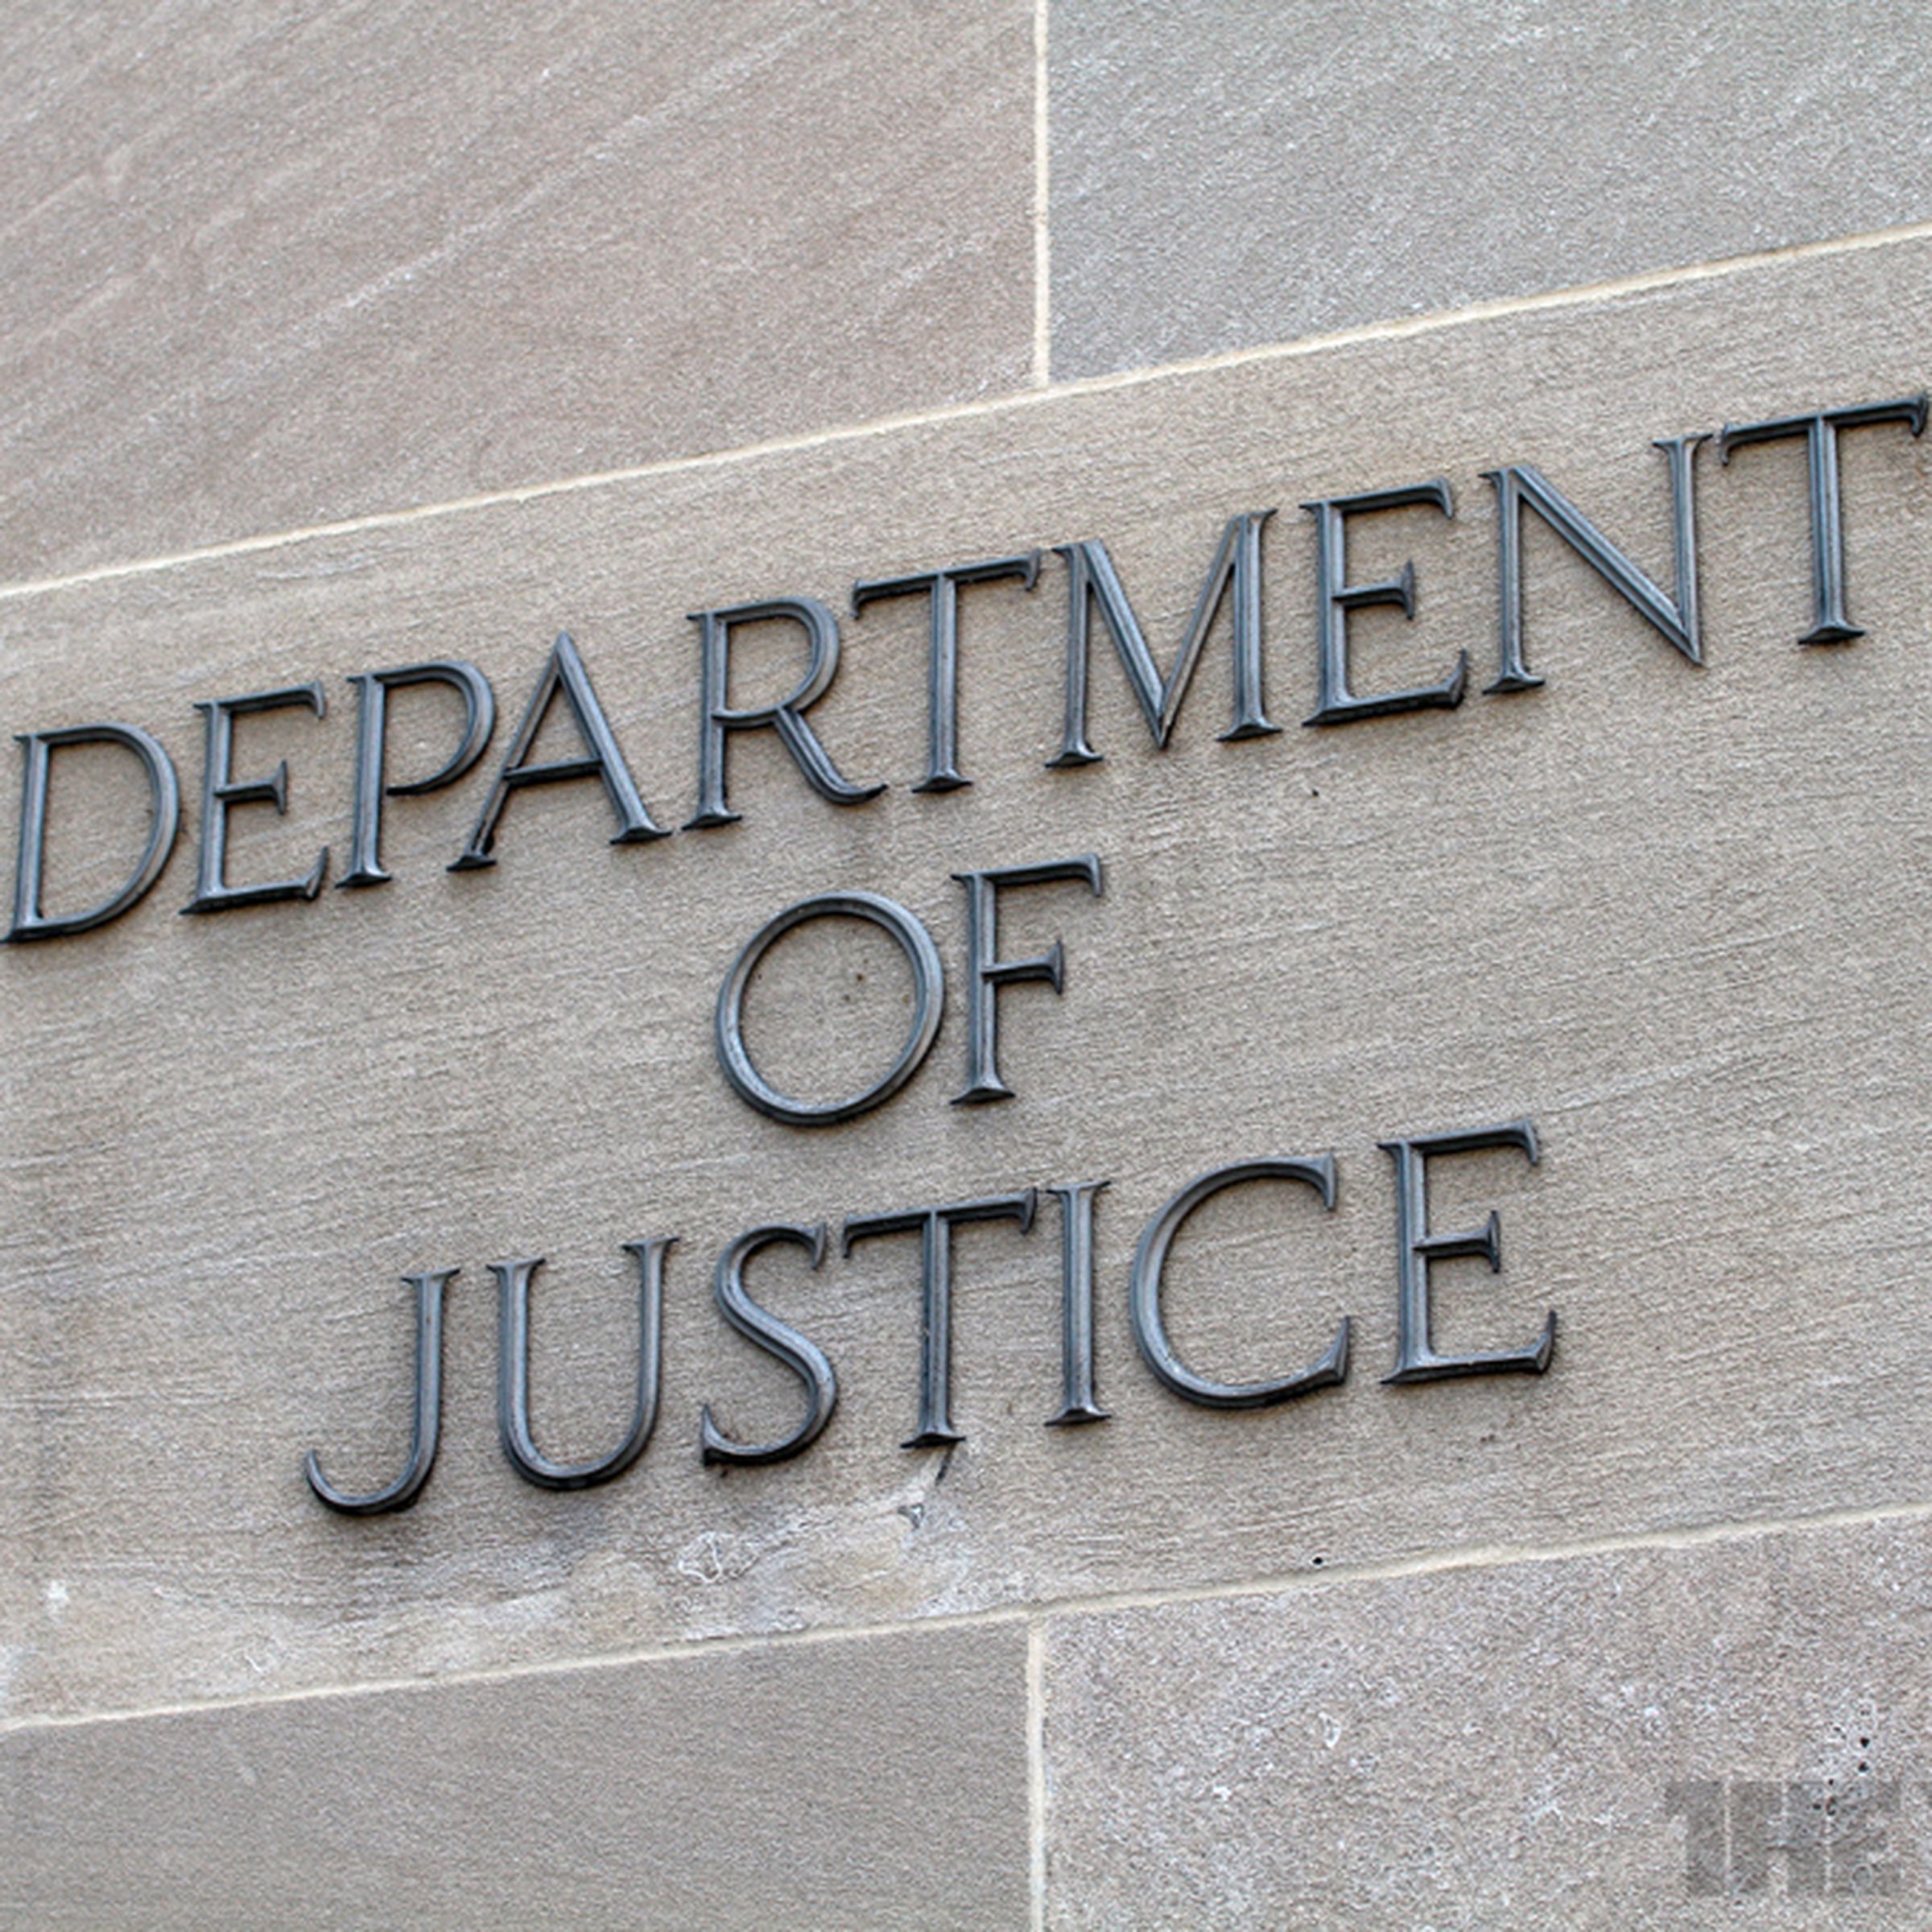 An image showing the Department of Justice lettering